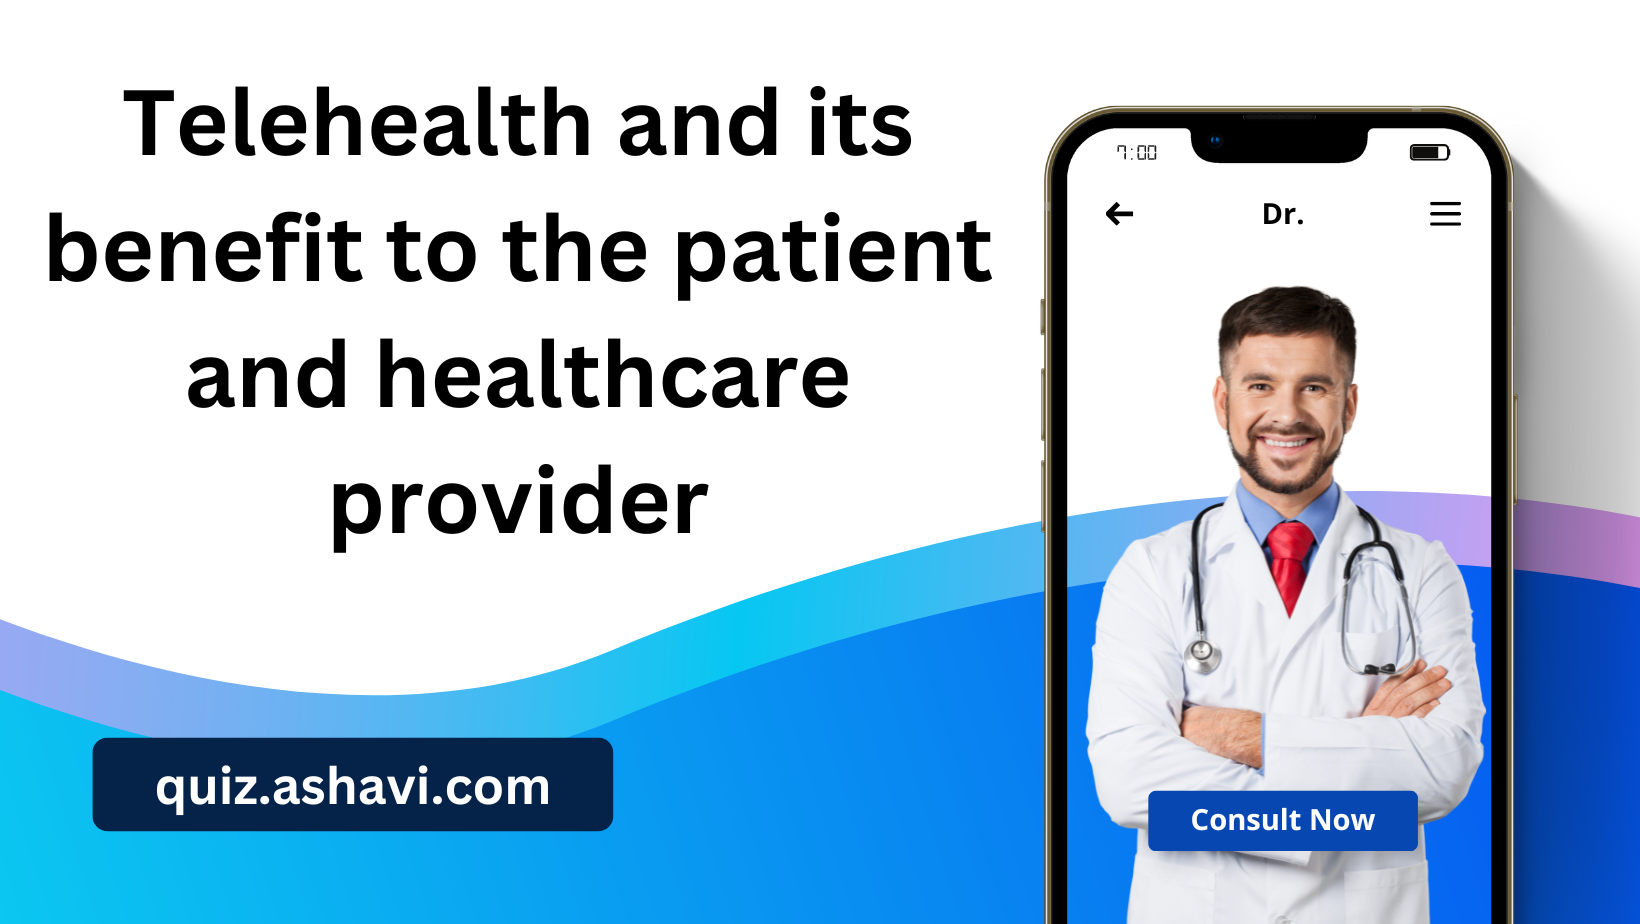 Telehealth and its benefit to the patient and healthcare provider